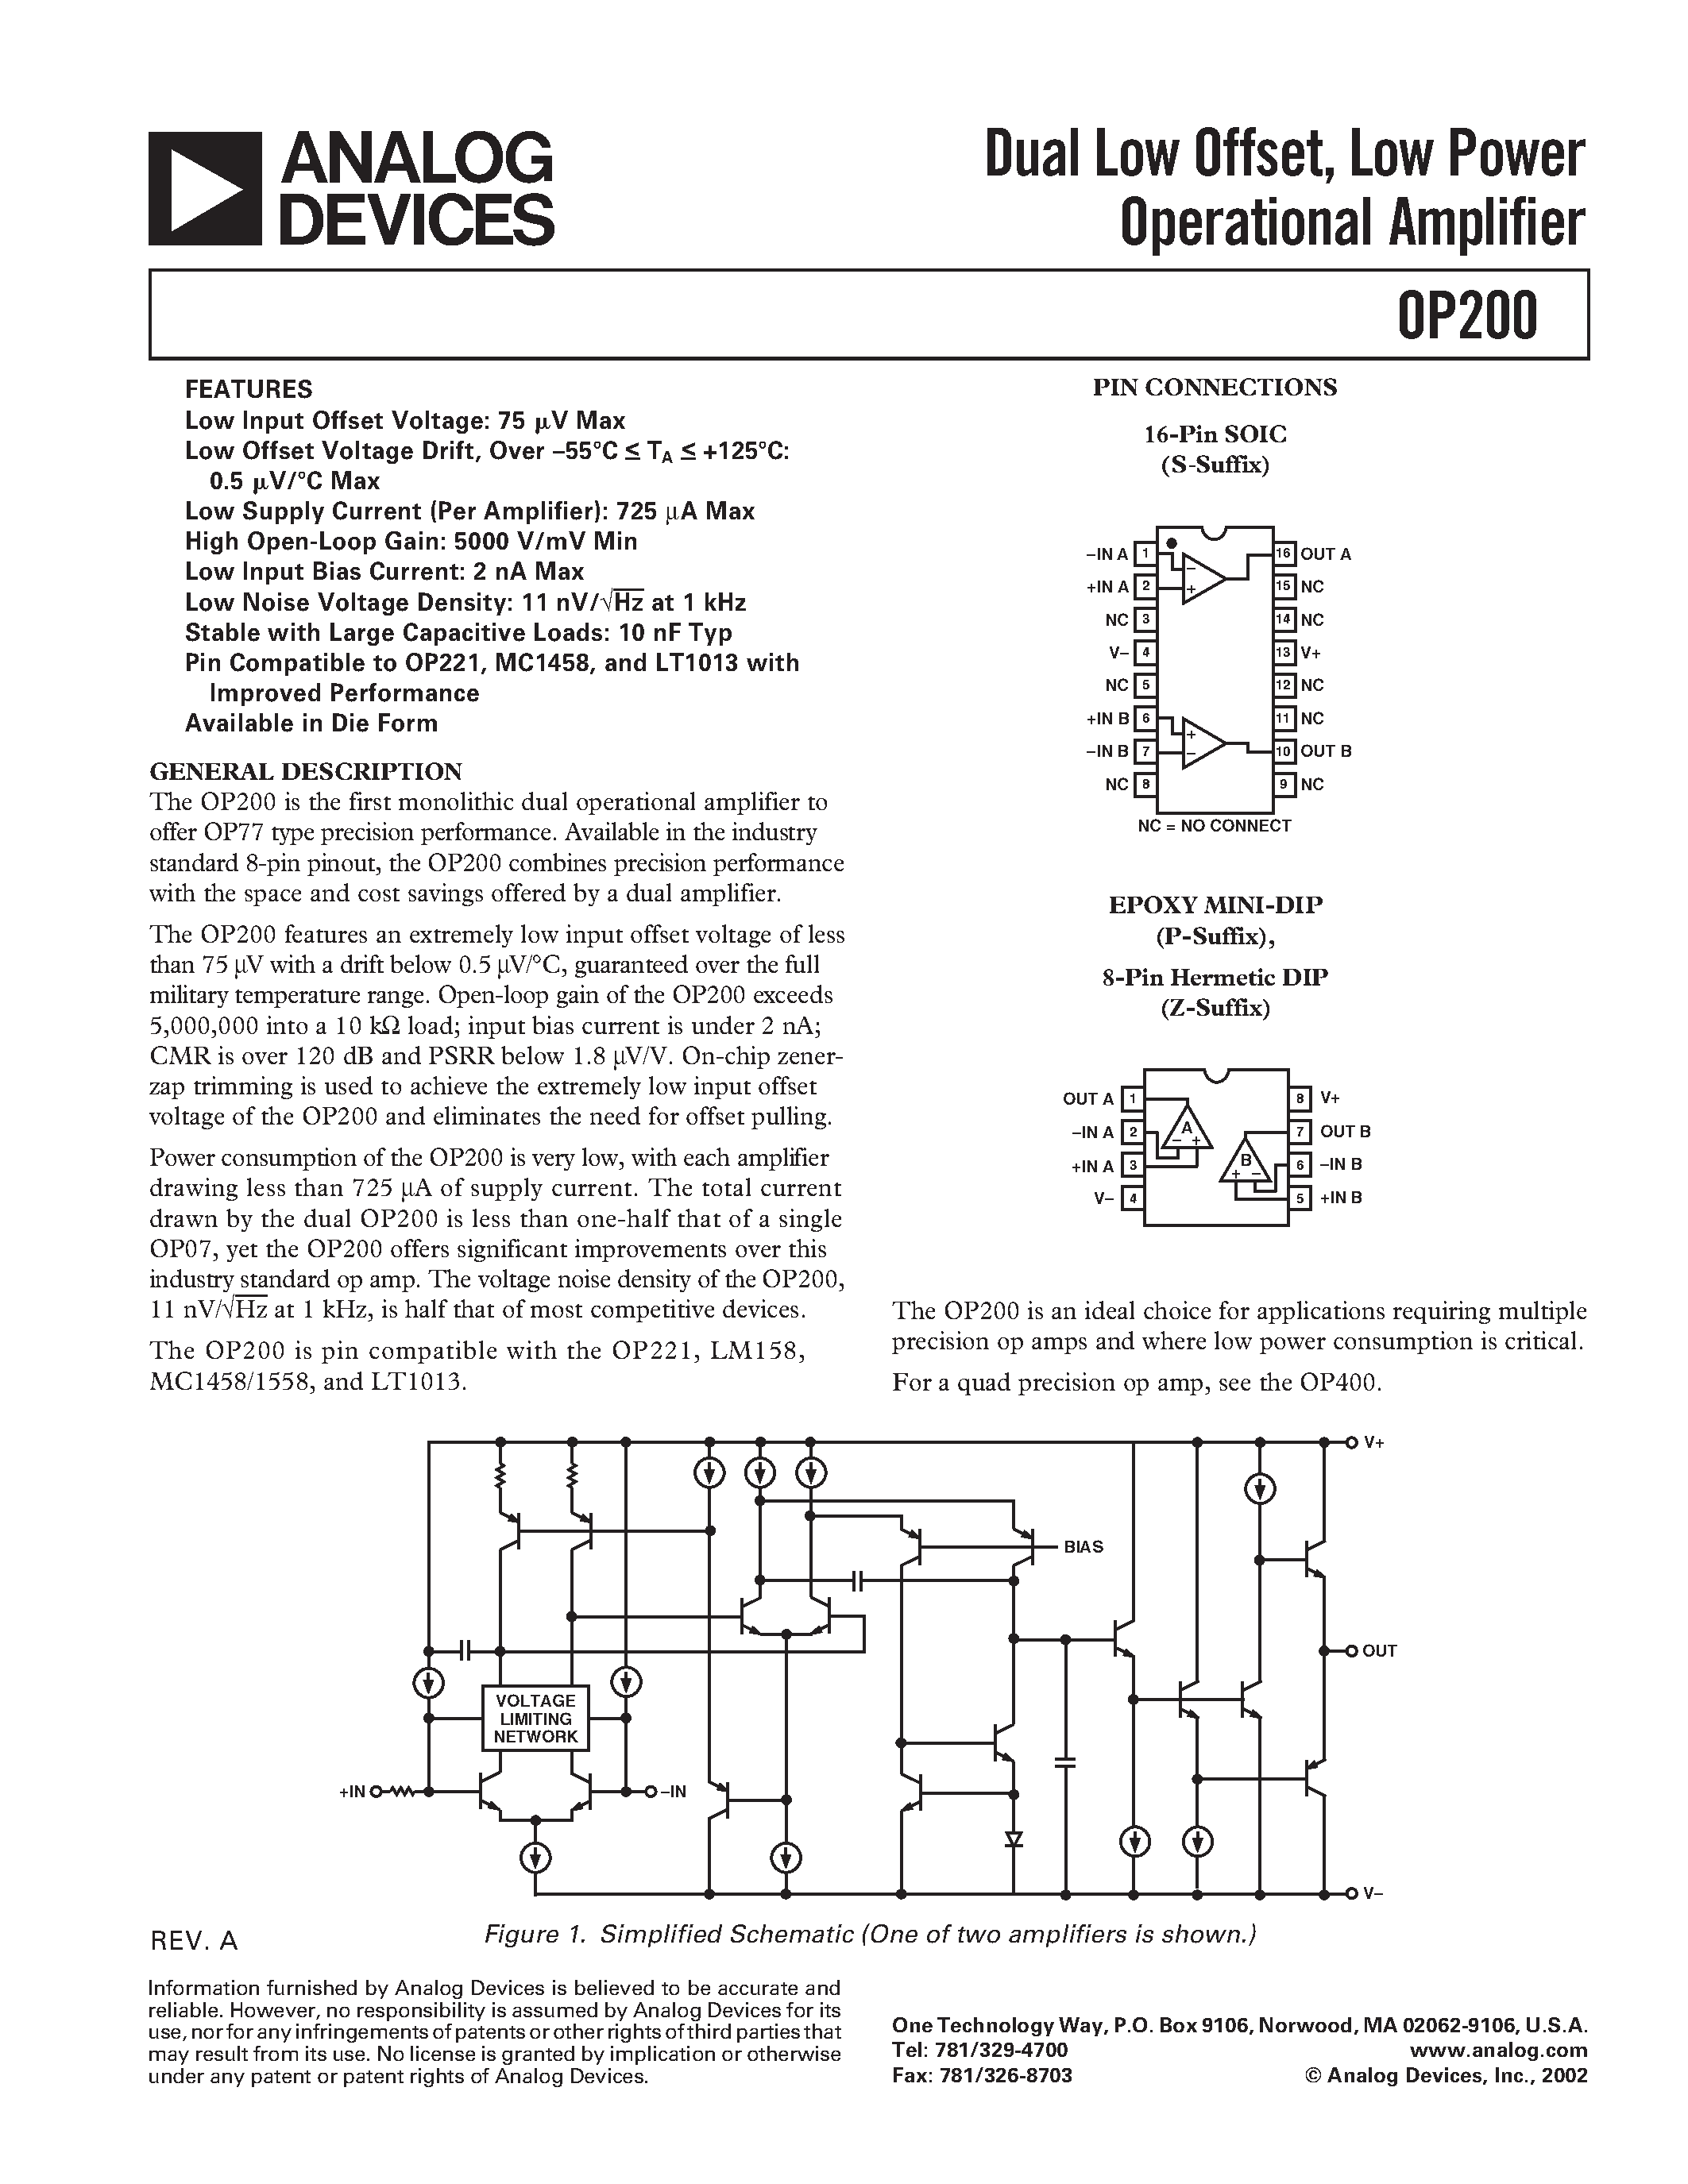 Datasheet OP200 - Dual Low Offset / Low Power Operational Amplifier page 1